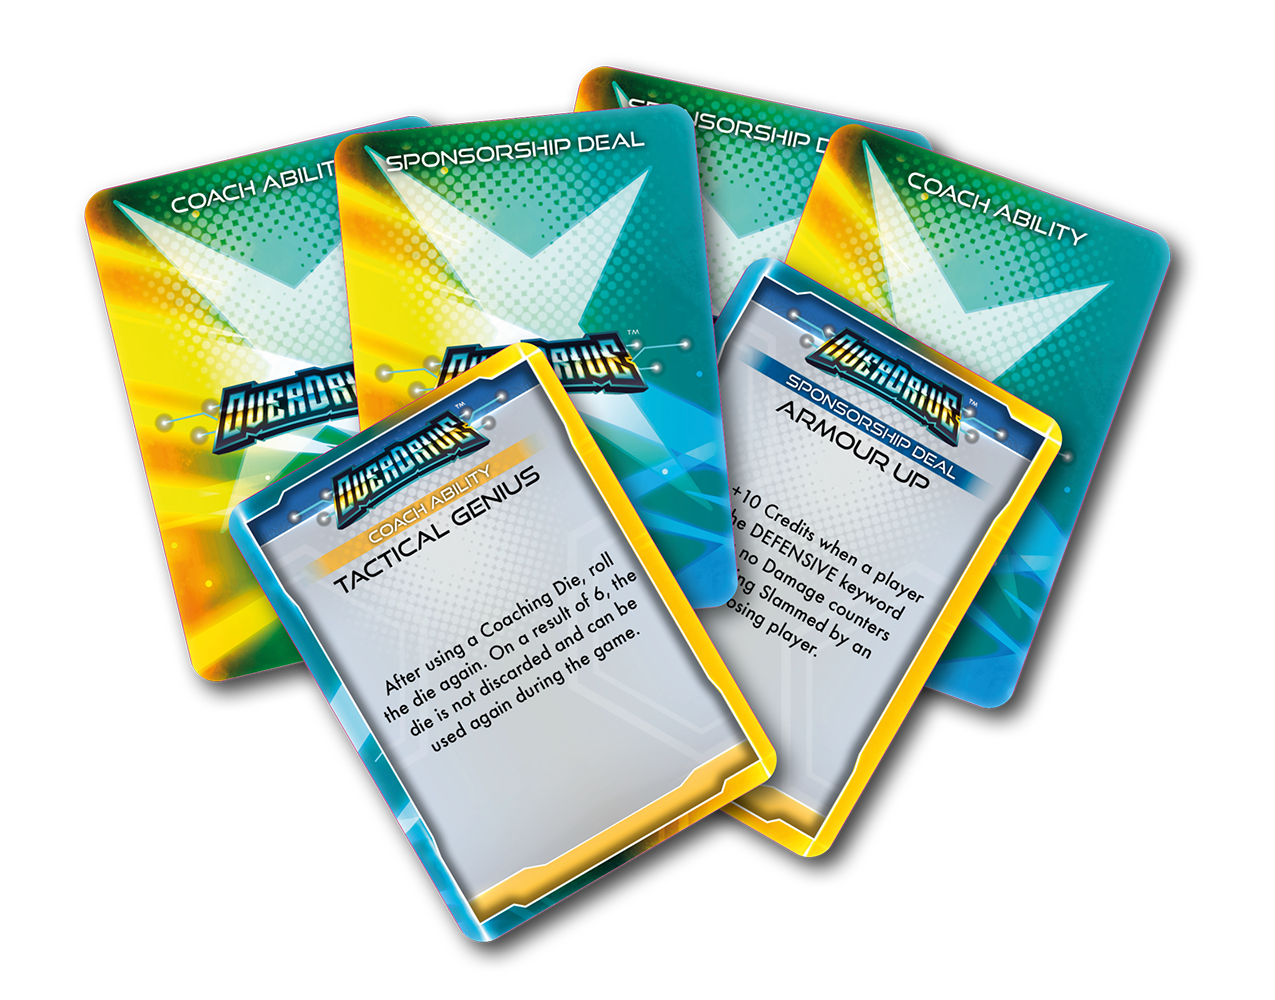 Overdrive Coach Abilities and Sponsorship Deals Card Deck card fan